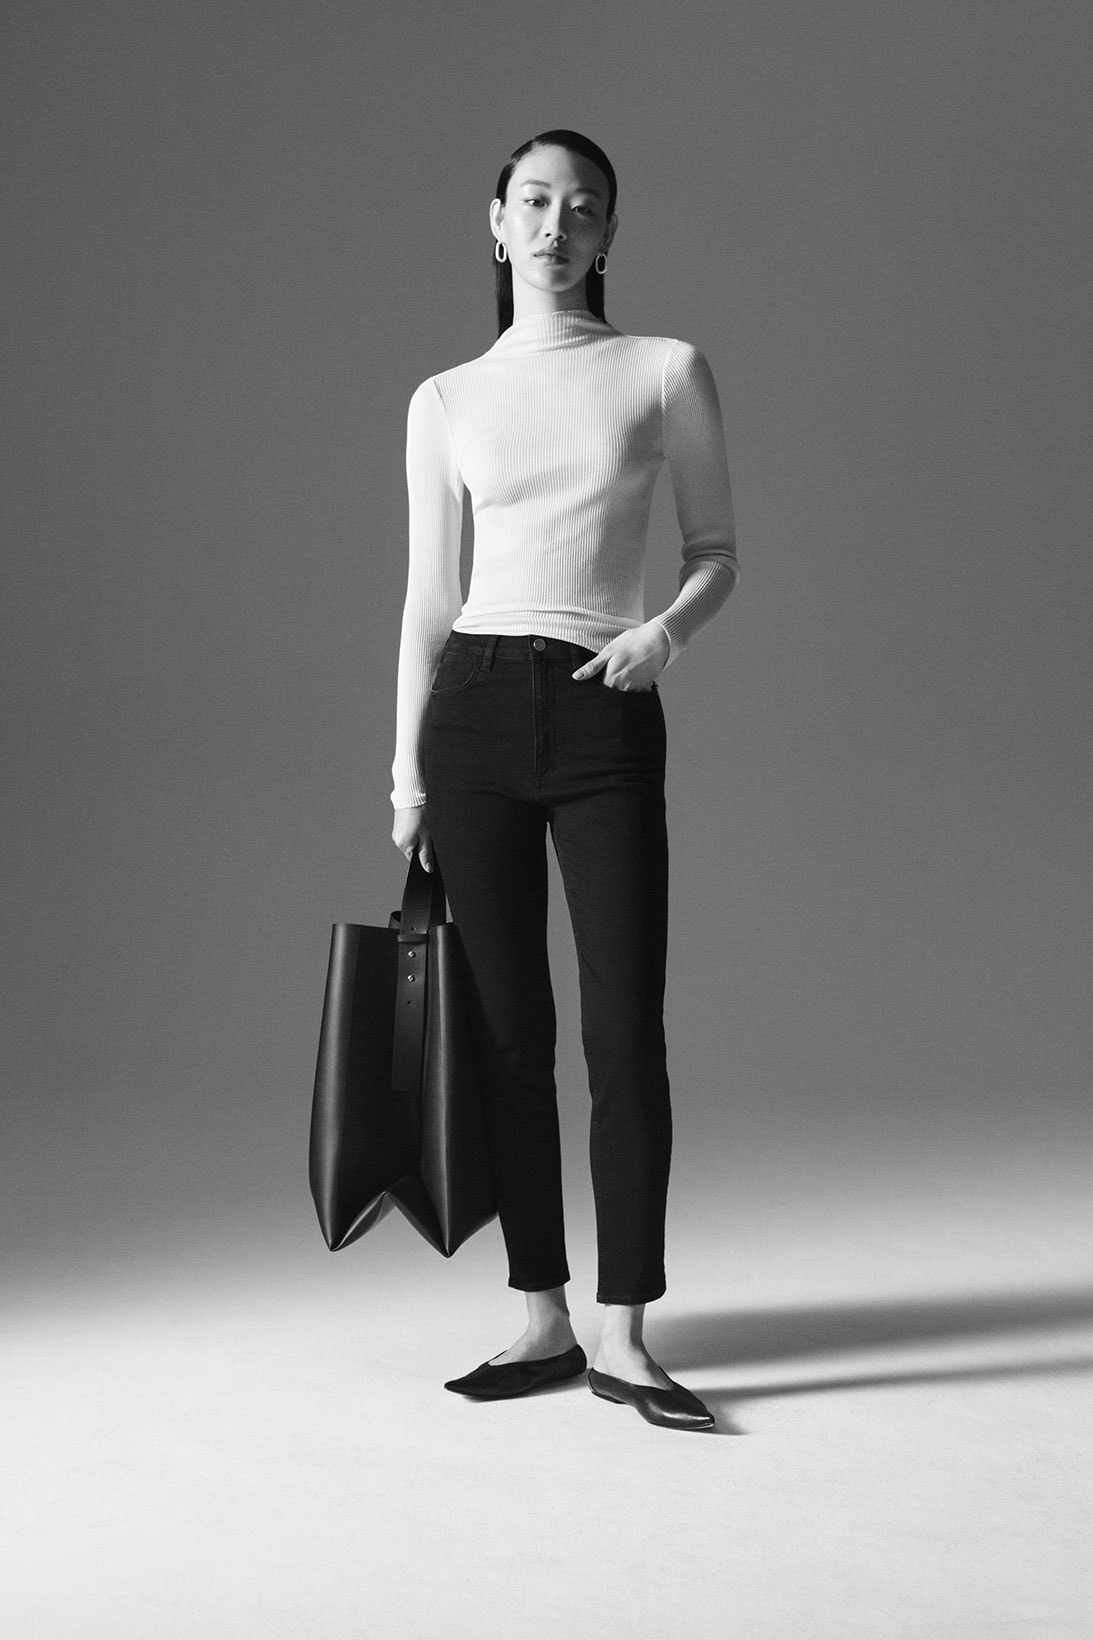 cos spring summer 2021 ss21 sustainable denim collection jeans sora choi white knit top bag